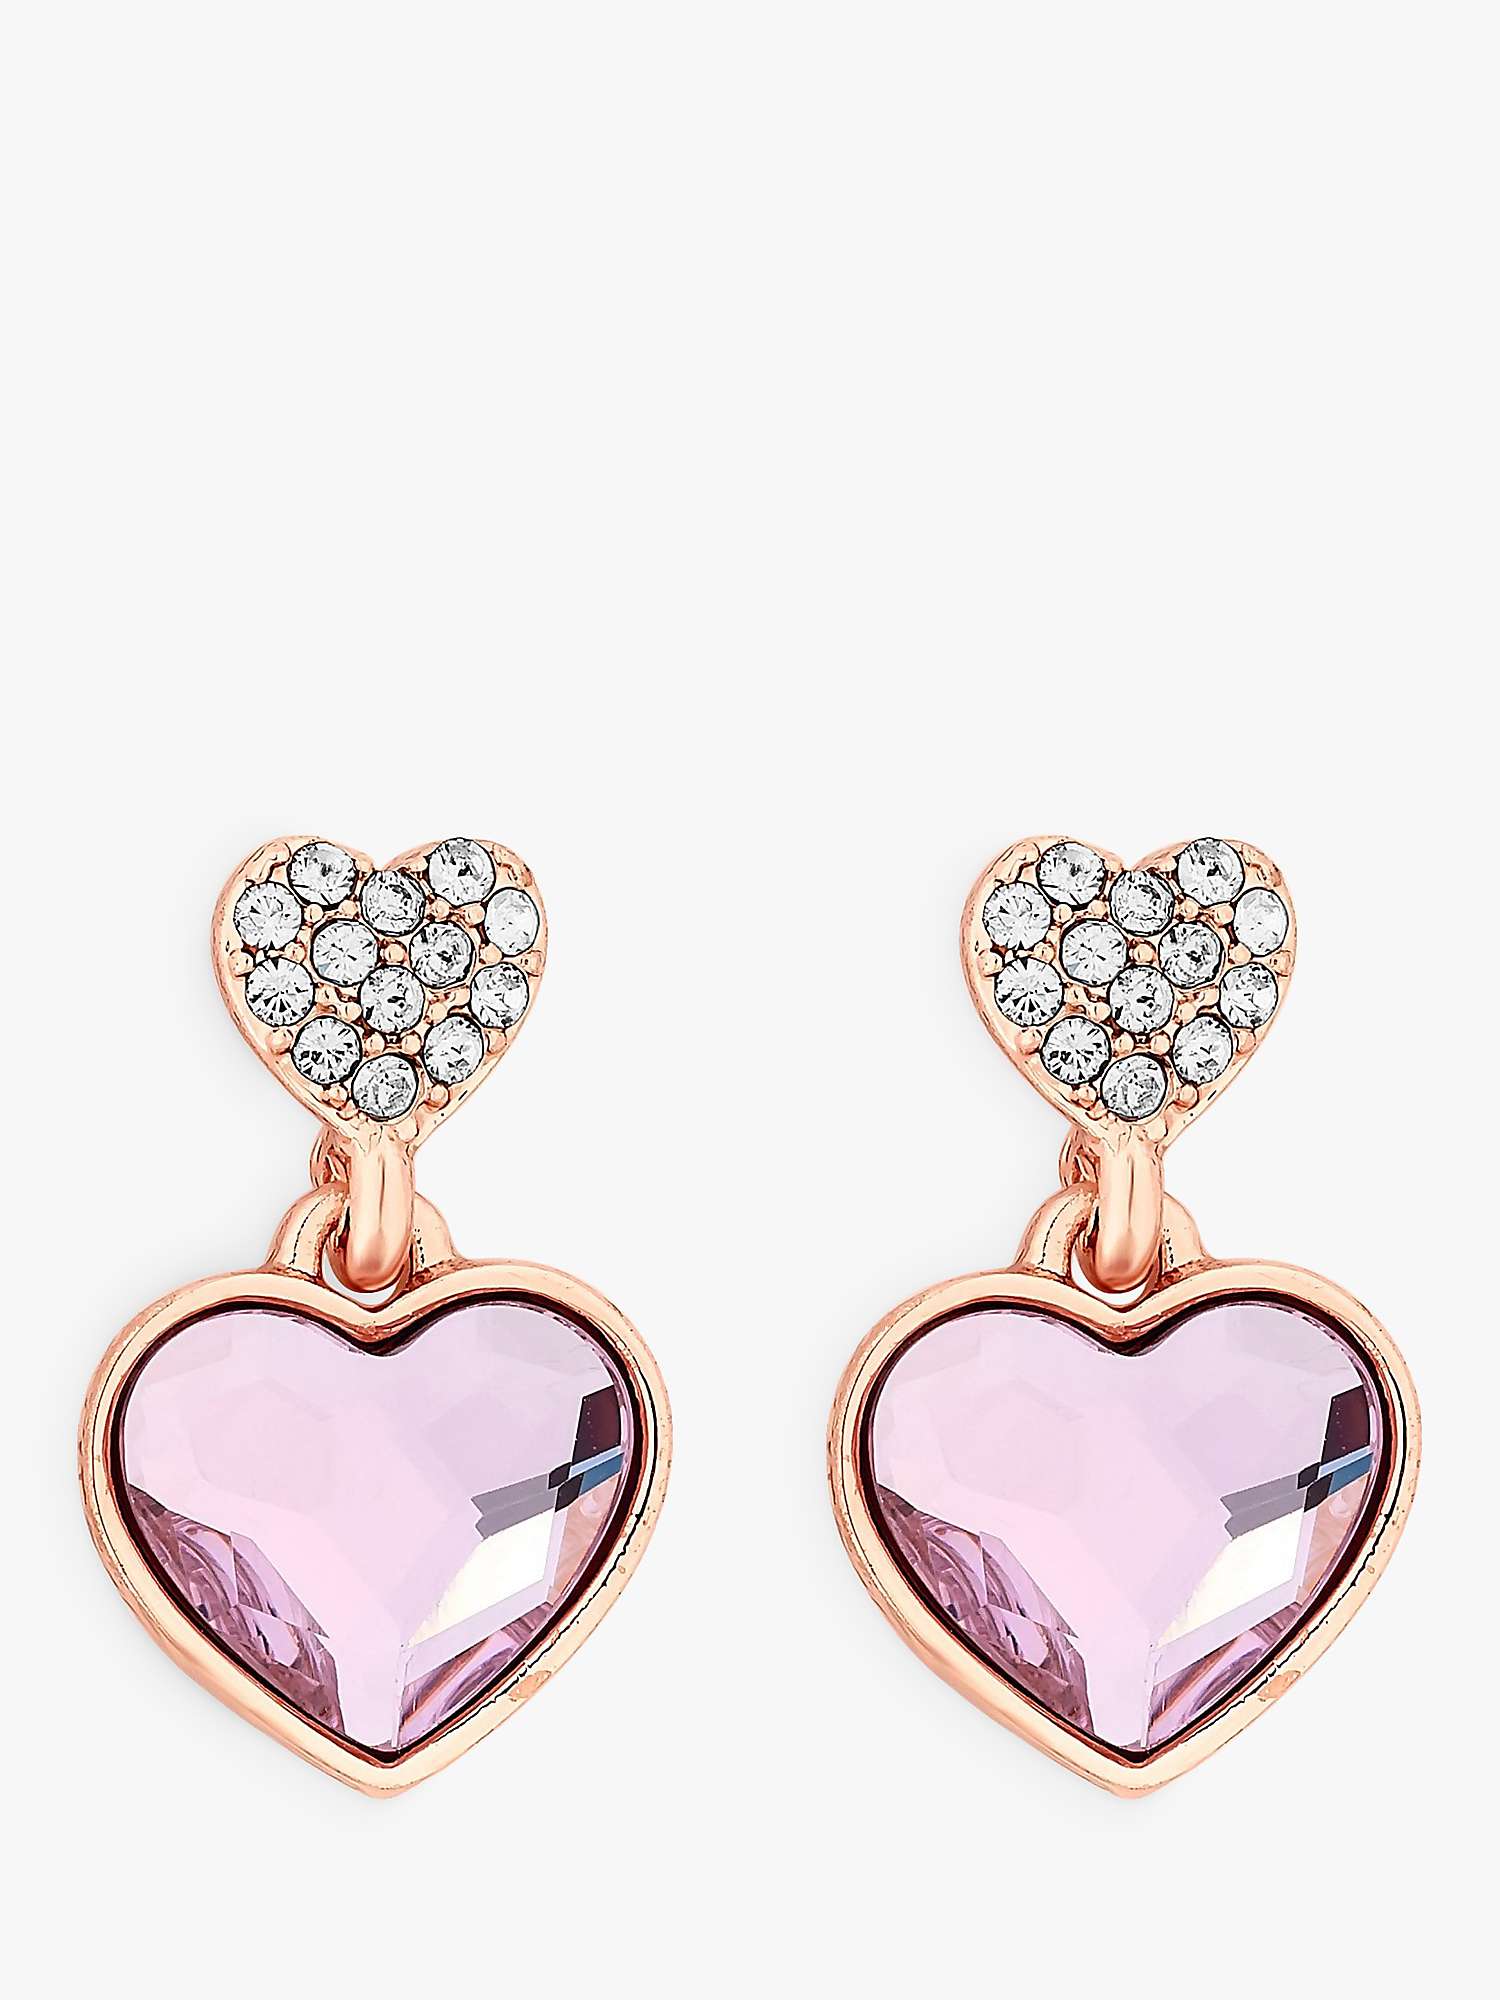 Buy Jon Richard Radiance Collection Crystal Heart Drop Earrings, Rose Gold/Pink Online at johnlewis.com